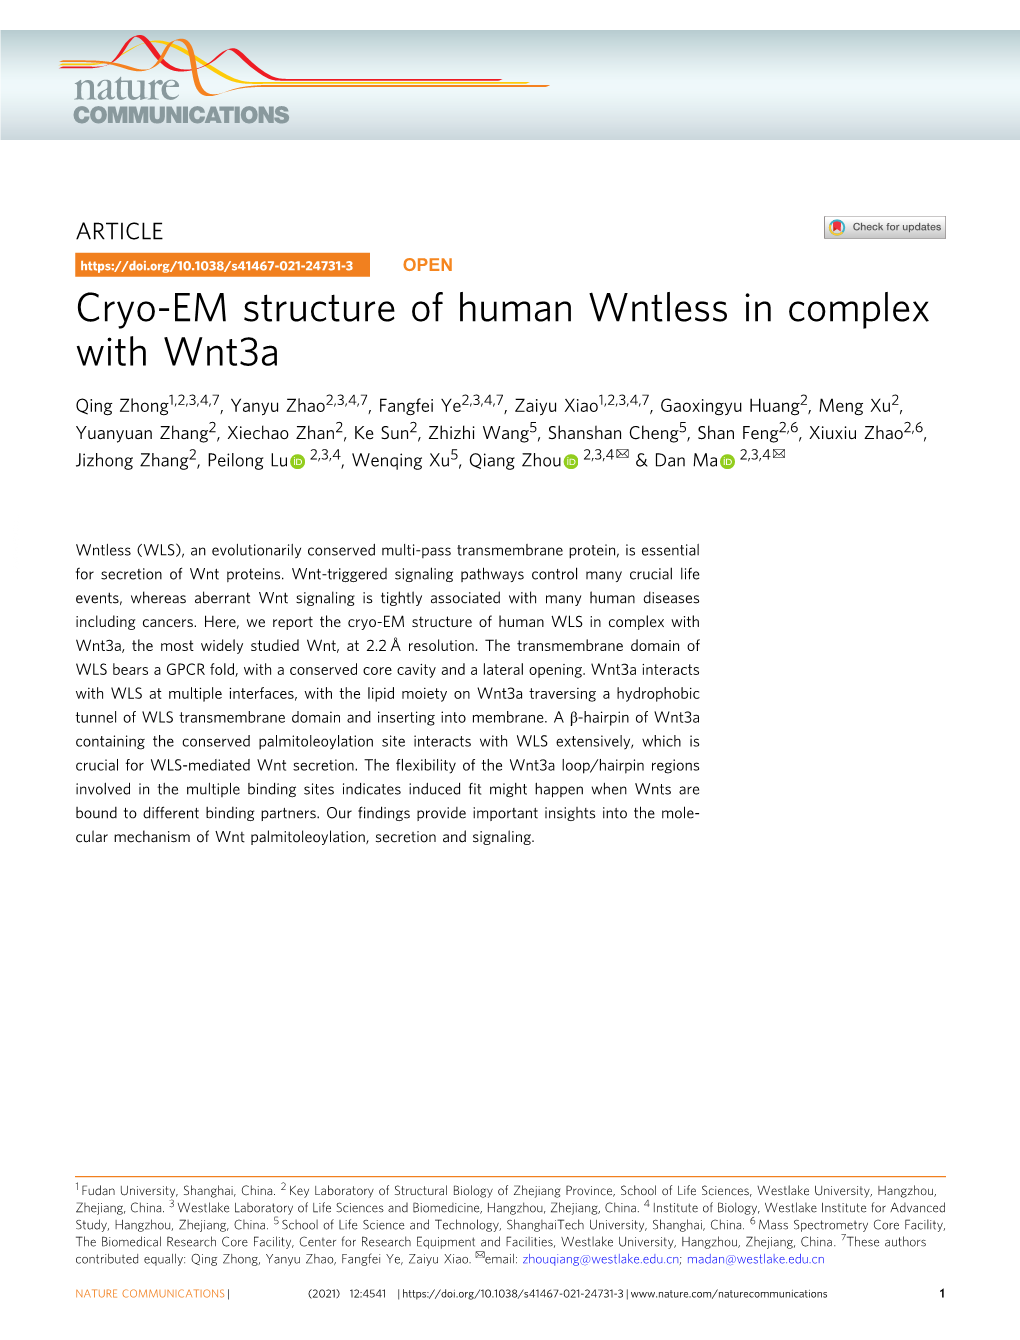 Cryo-EM Structure of Human Wntless in Complex with Wnt3a